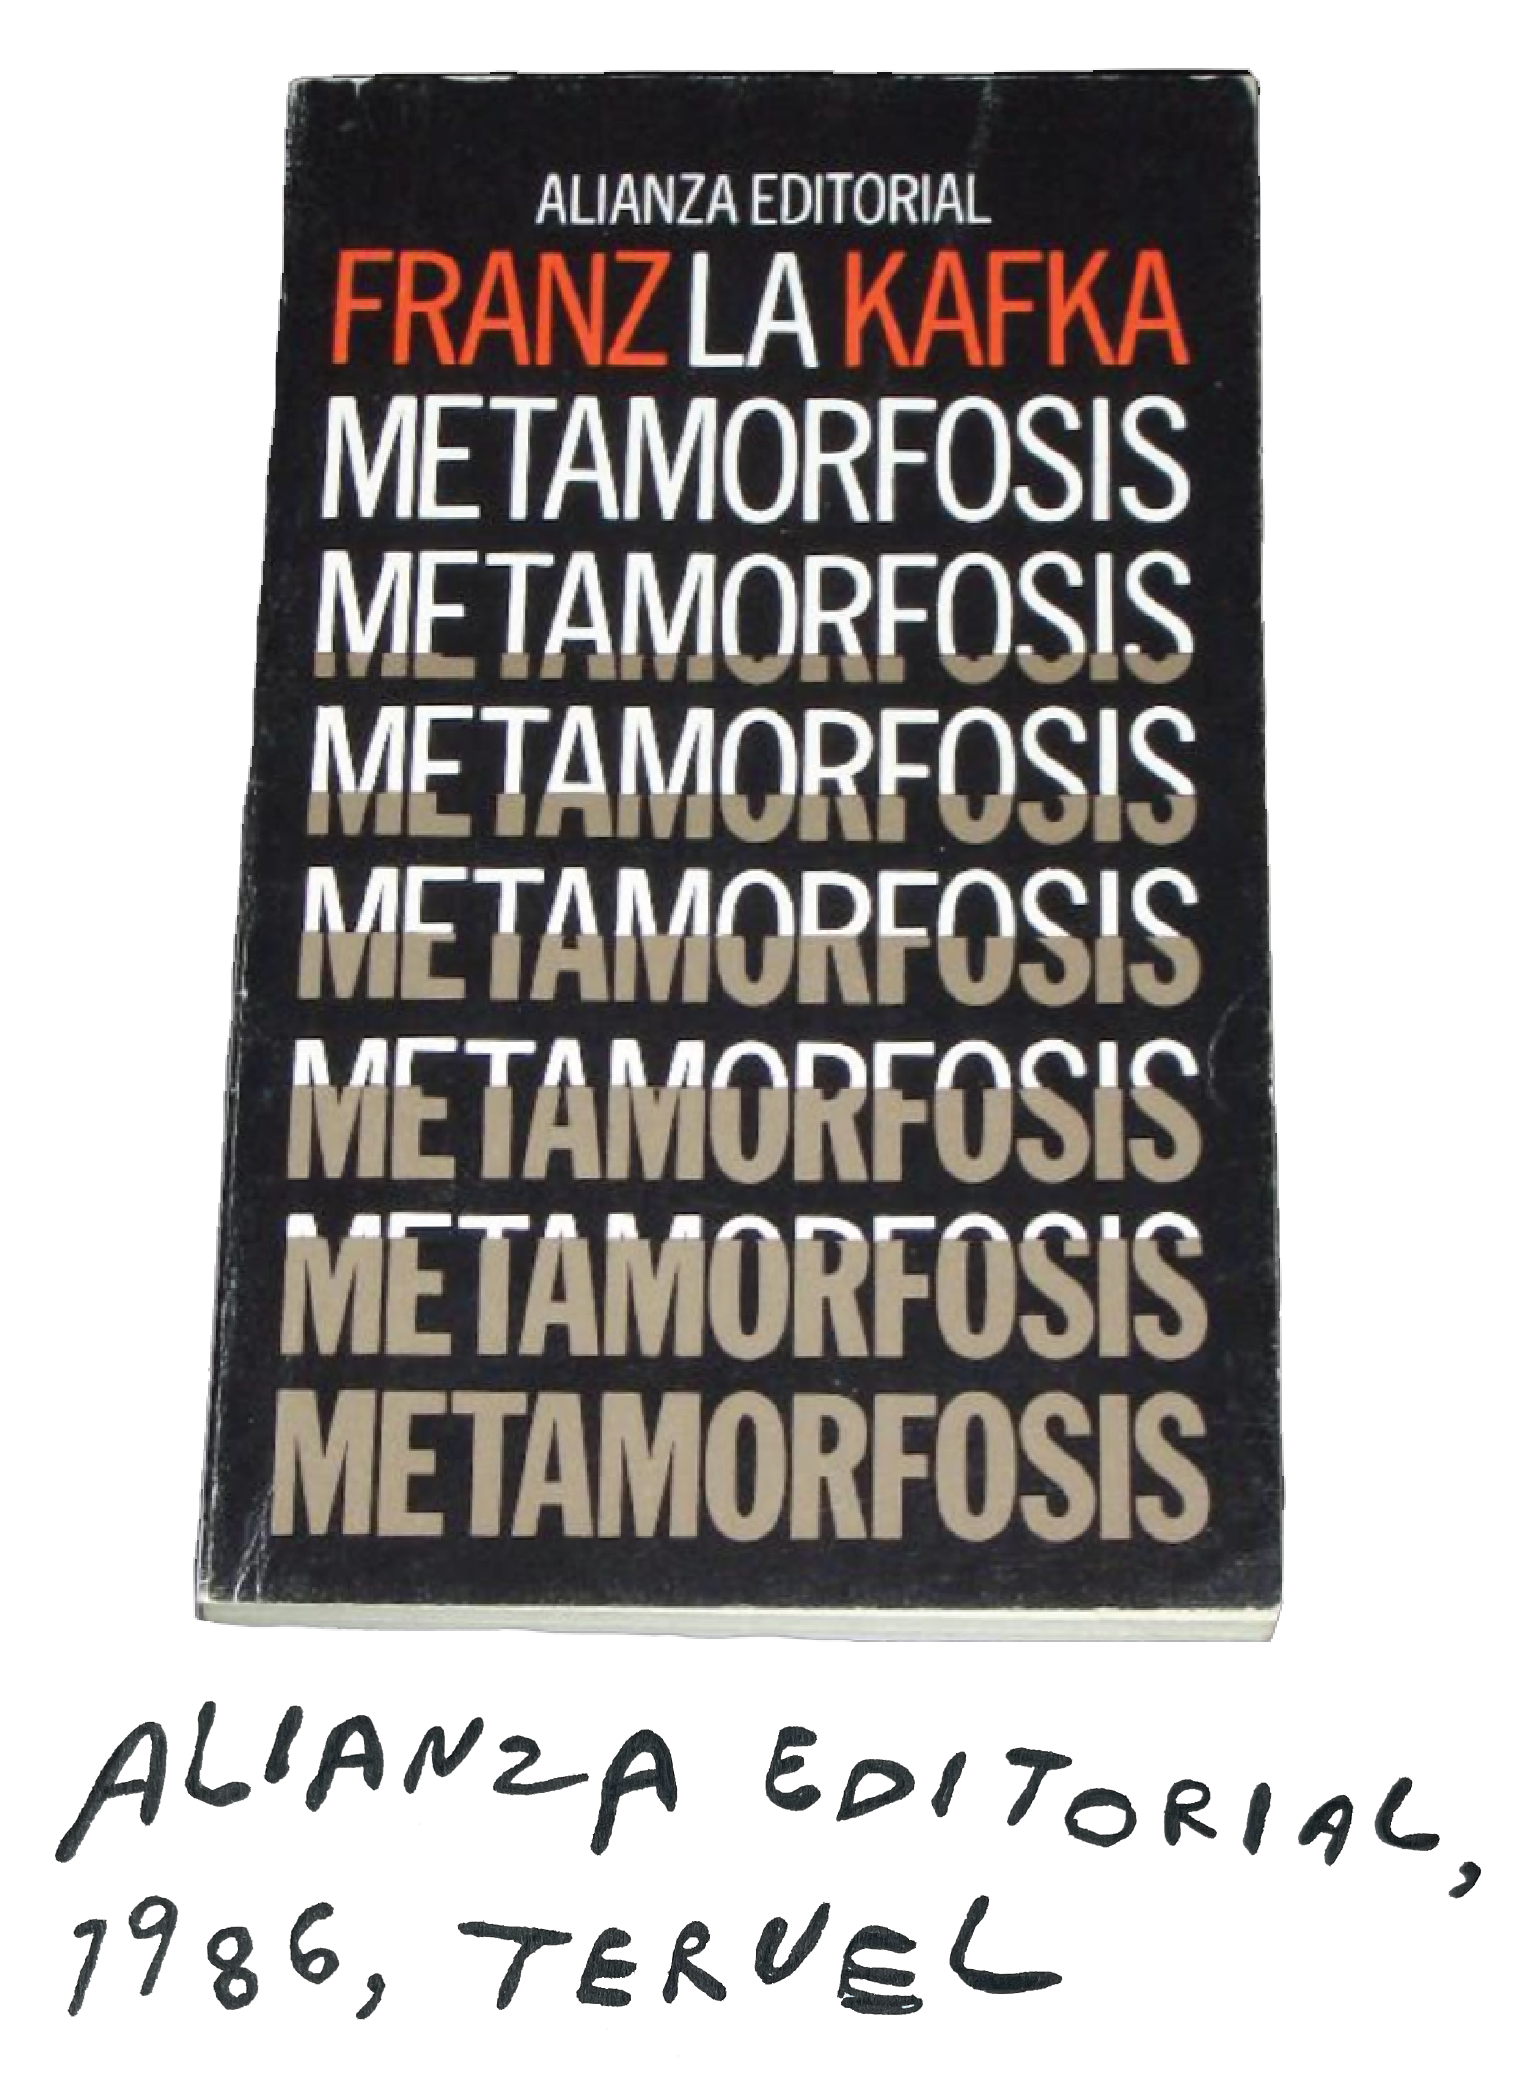 A black cover covered in bold, all caps, lettering. At the top, "Franz Kafka" is spelled out in red. Below are seven lines reading "Metamorfosis," each one gradually becoming greyer and bolder. The handwritten caption reads, "Alianza Editorial, 1986, Teruel."